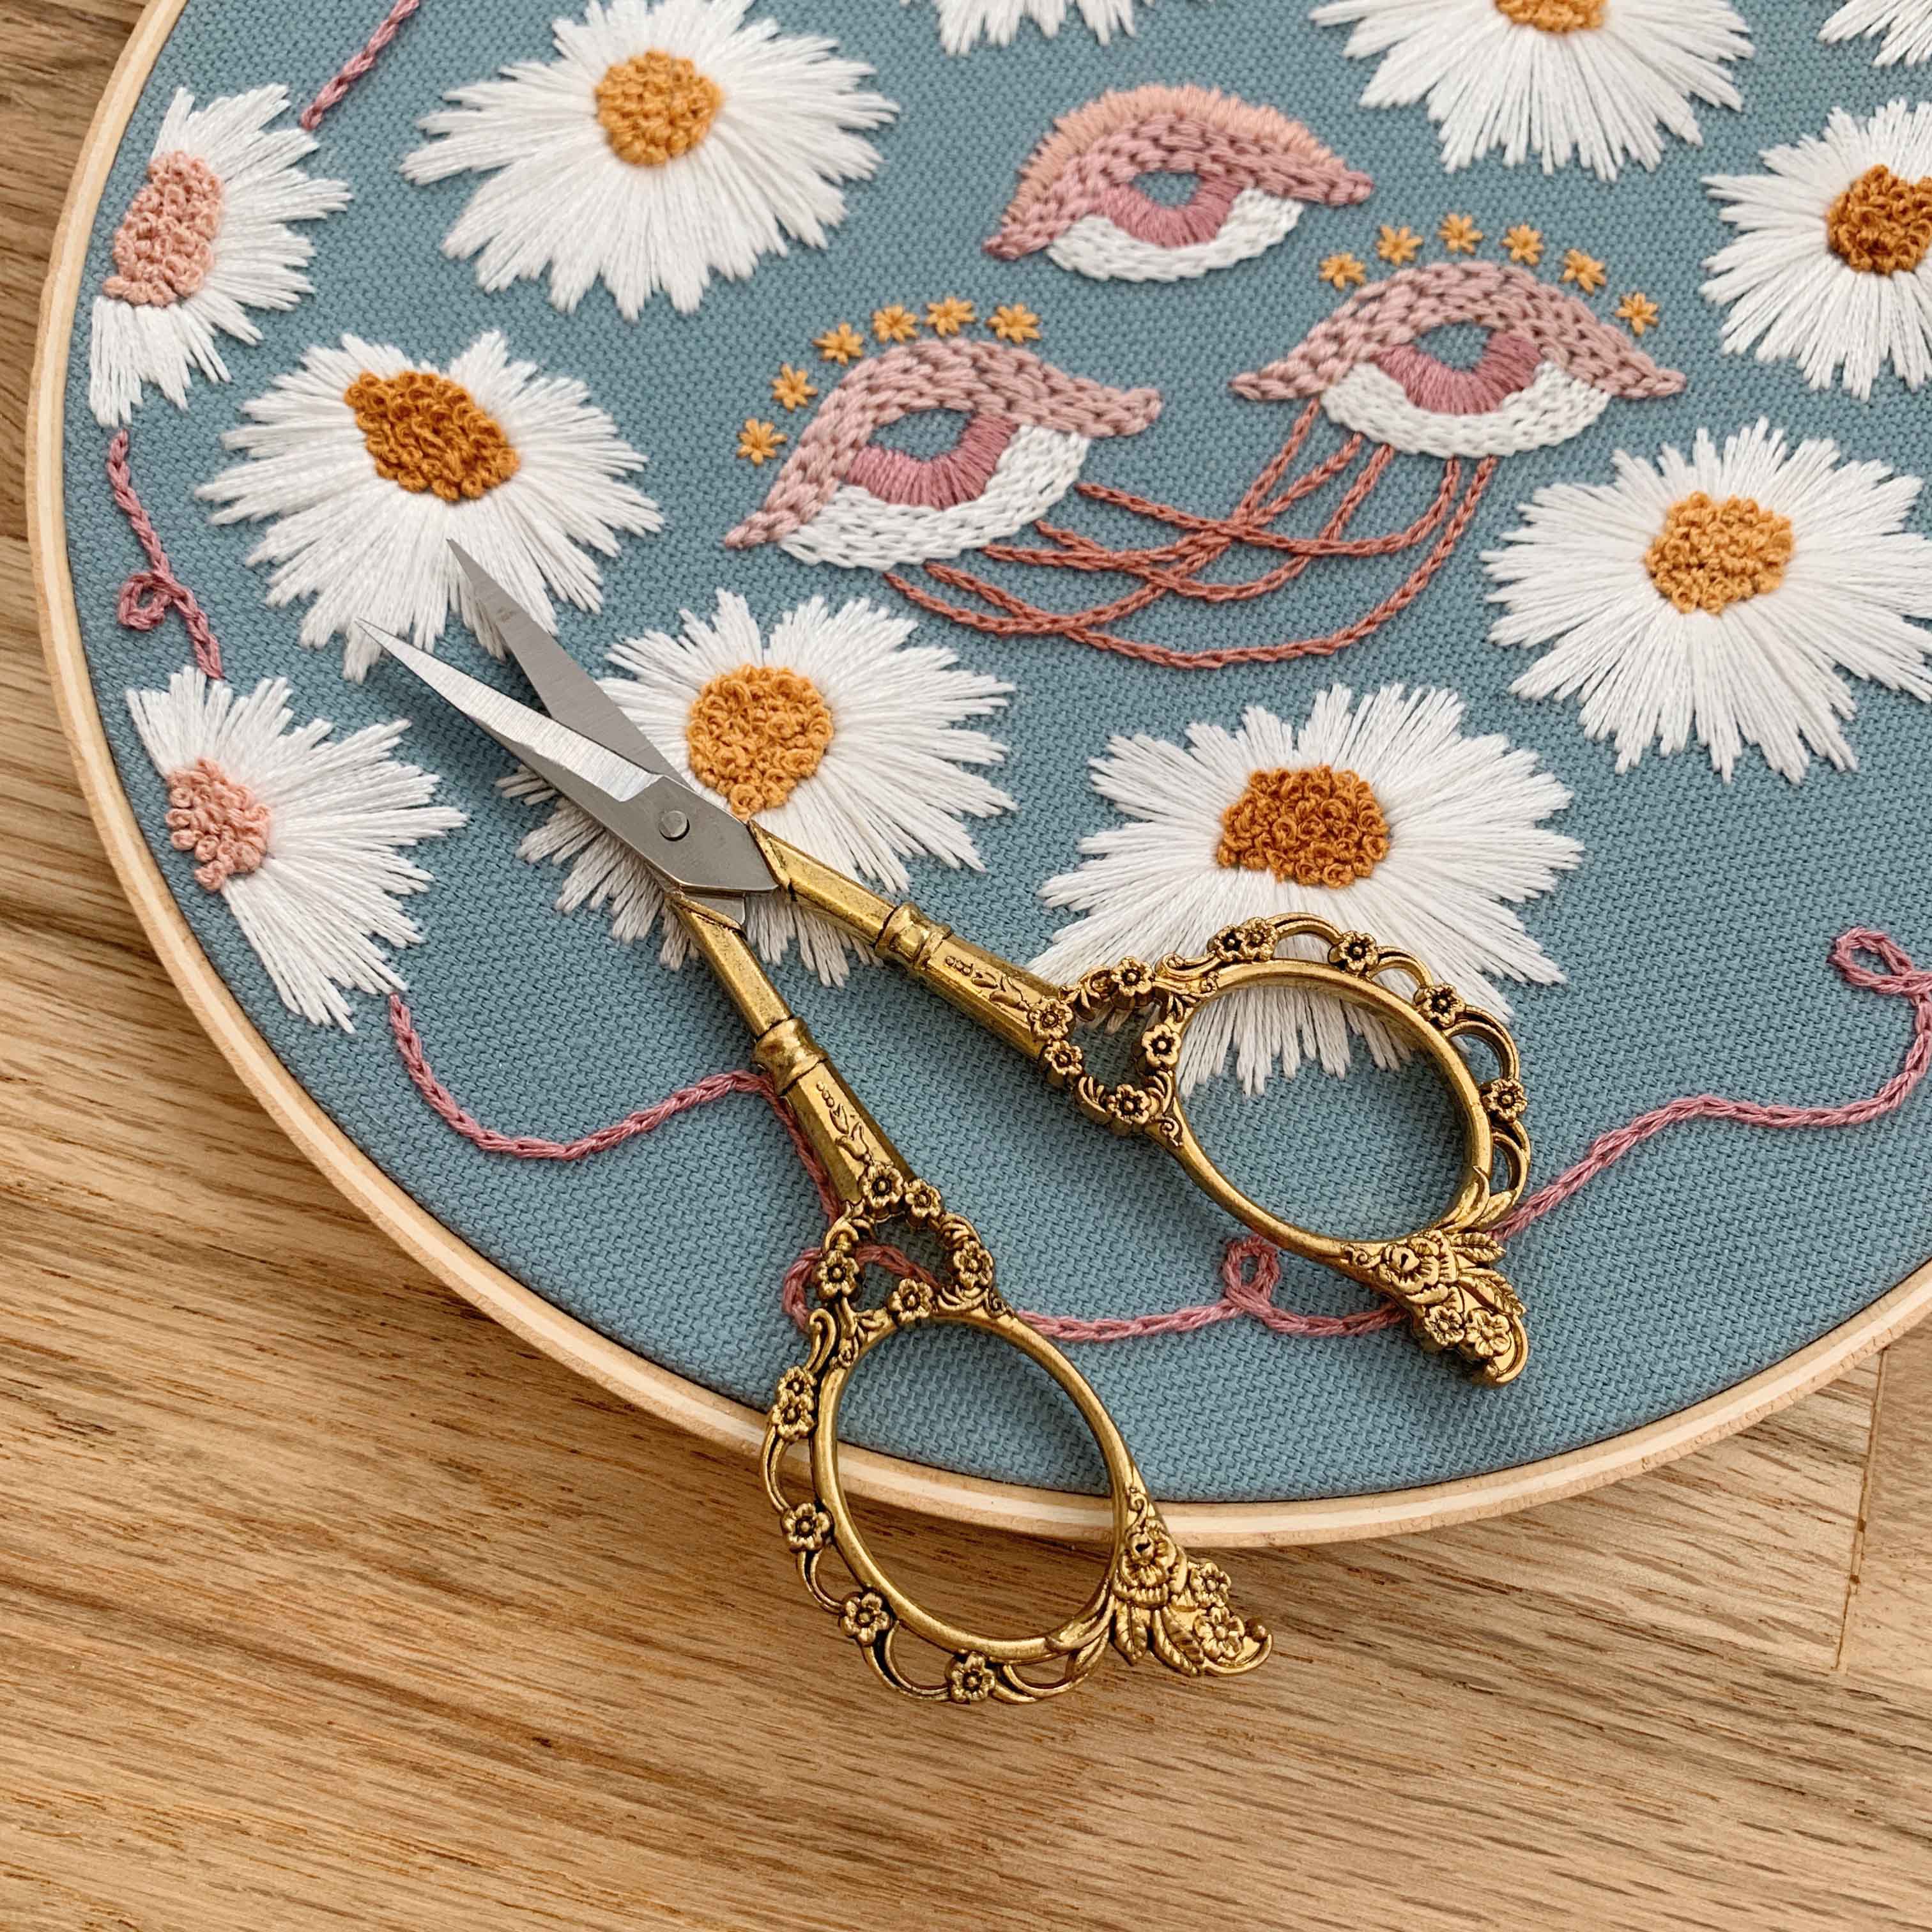 Ornate Floral Embroidery Scissors – Thread Honey